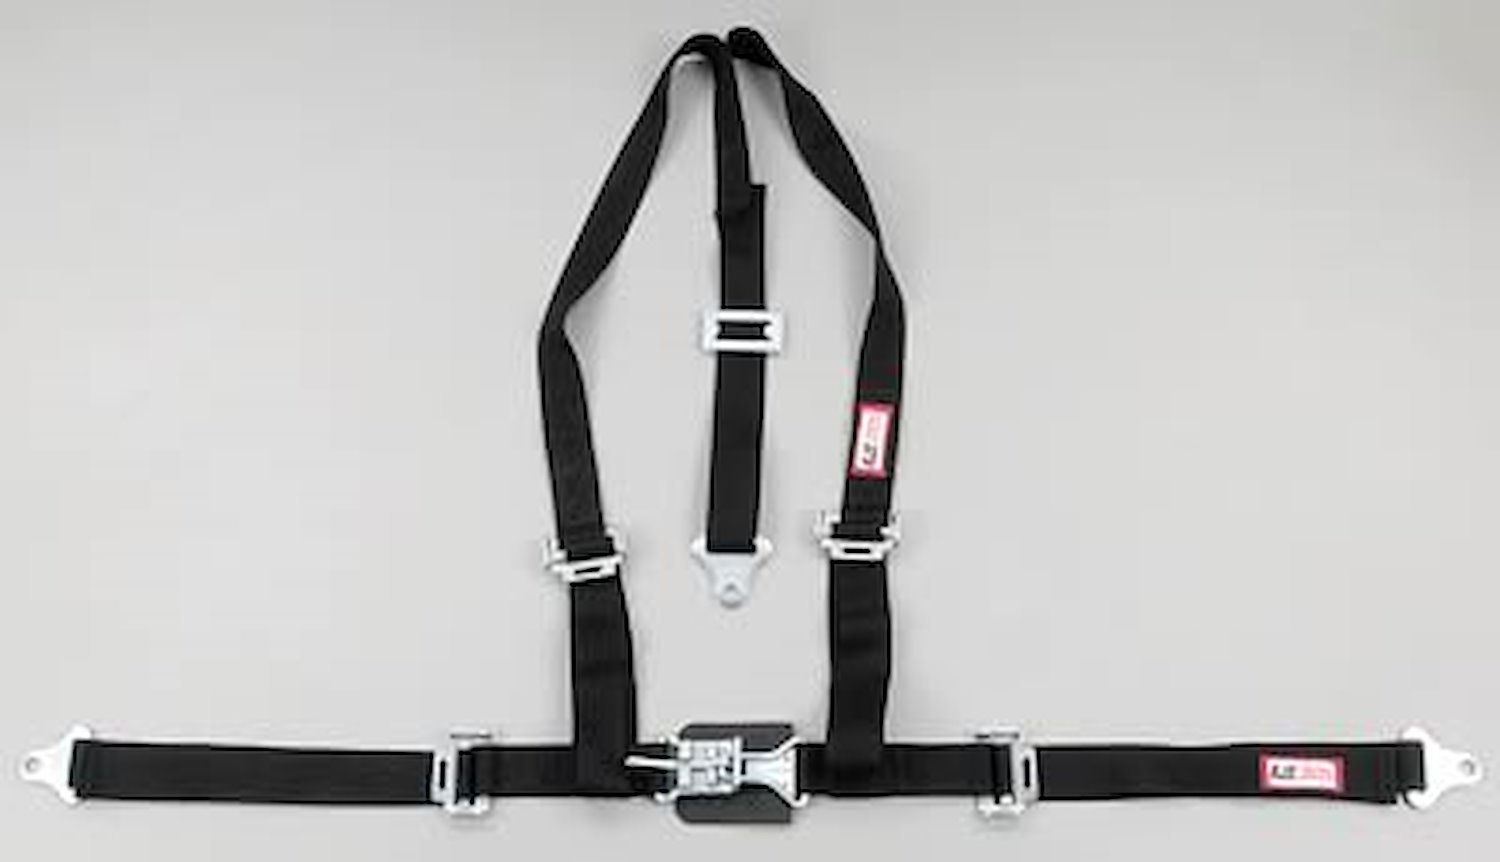 NON-SFI L&L HARNESS 2 PULL UP Lap Belt SEWN IN 2 S.H. INDIVIDUAL FLOOR Mount w/STERNUM STRAP ALL WRAP ENDS RED